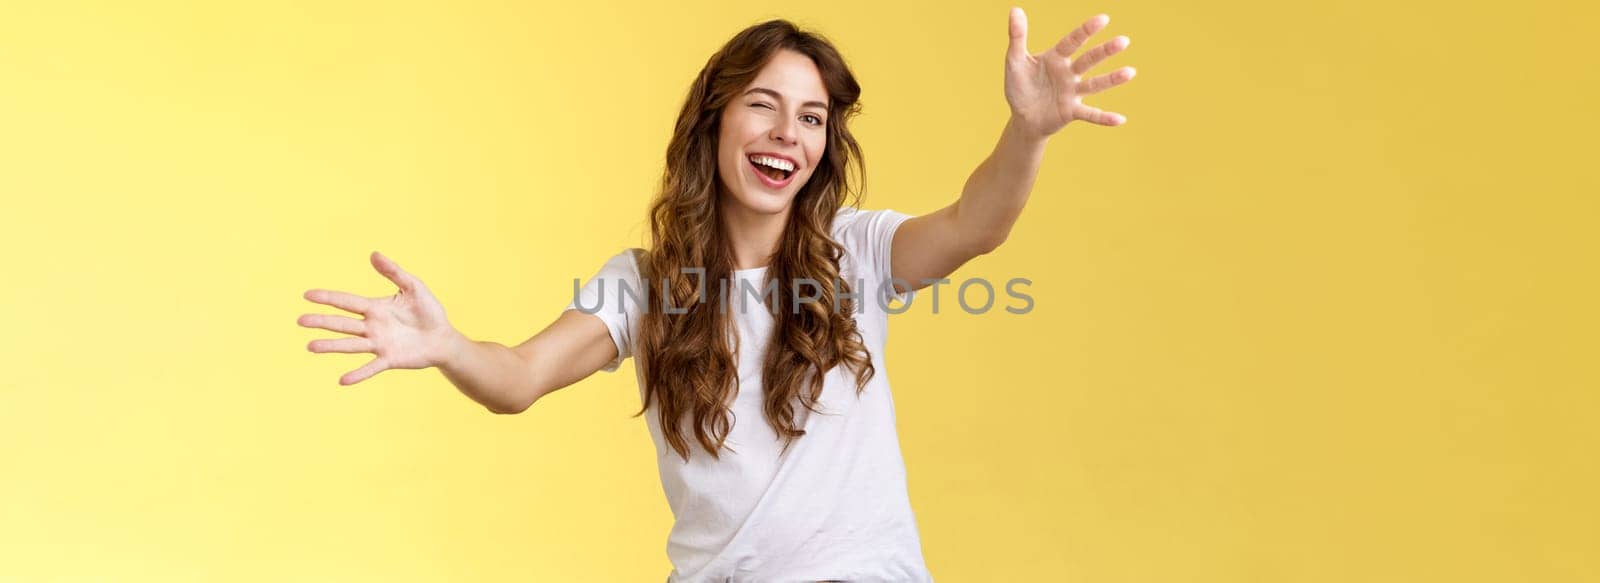 Girl cheering up sad friend wanna comfort girlfriend winking upbeat optimistic attitude extend arms towards camera cuddling reaching you give hug embracing guest smiling broadly invite come in. Lifestyle.